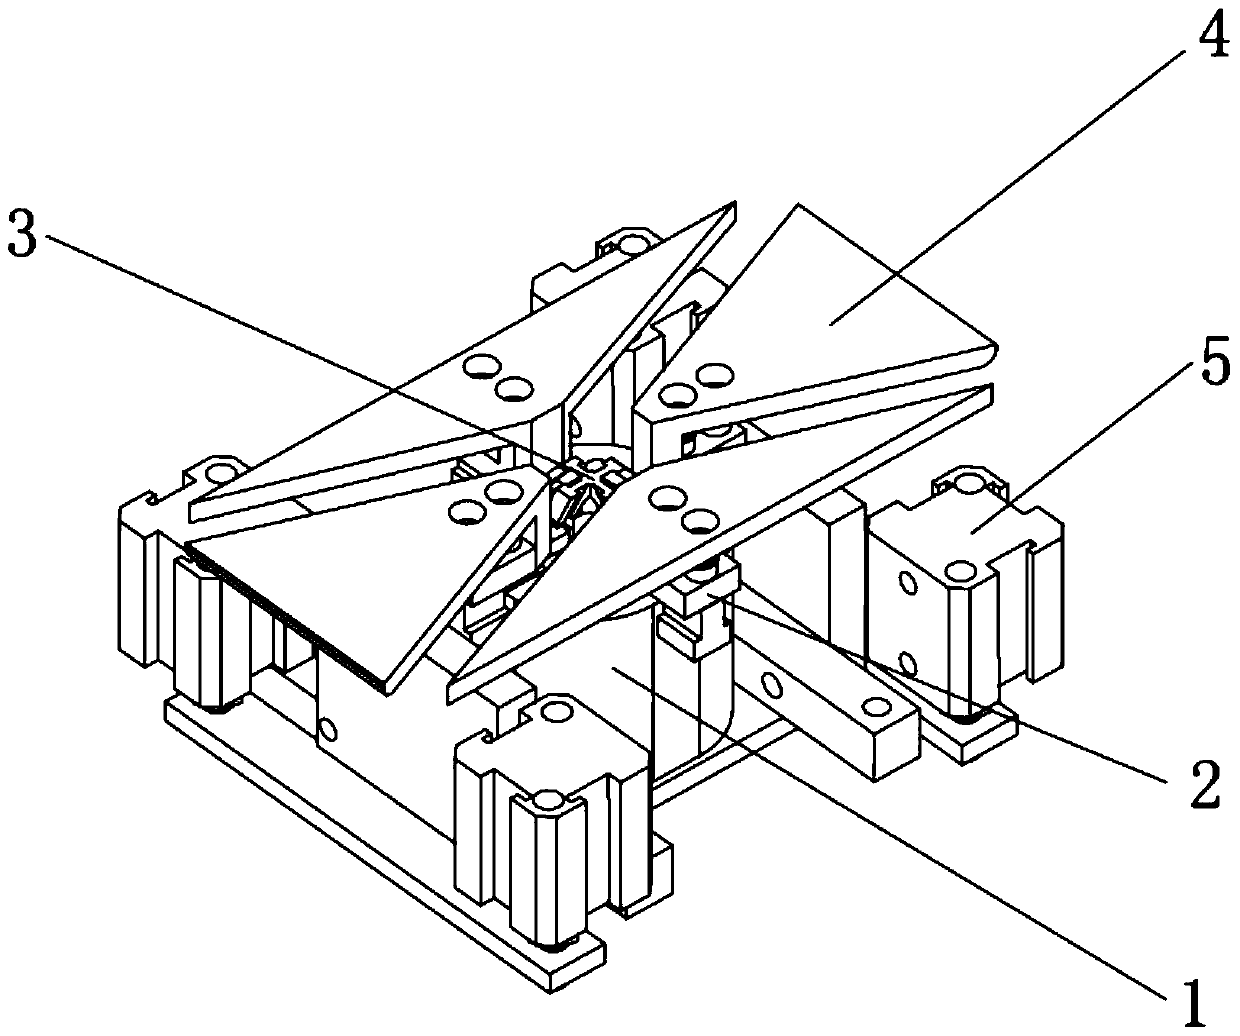 A hemming device of a cot machine for hemming the sunroof of the cot